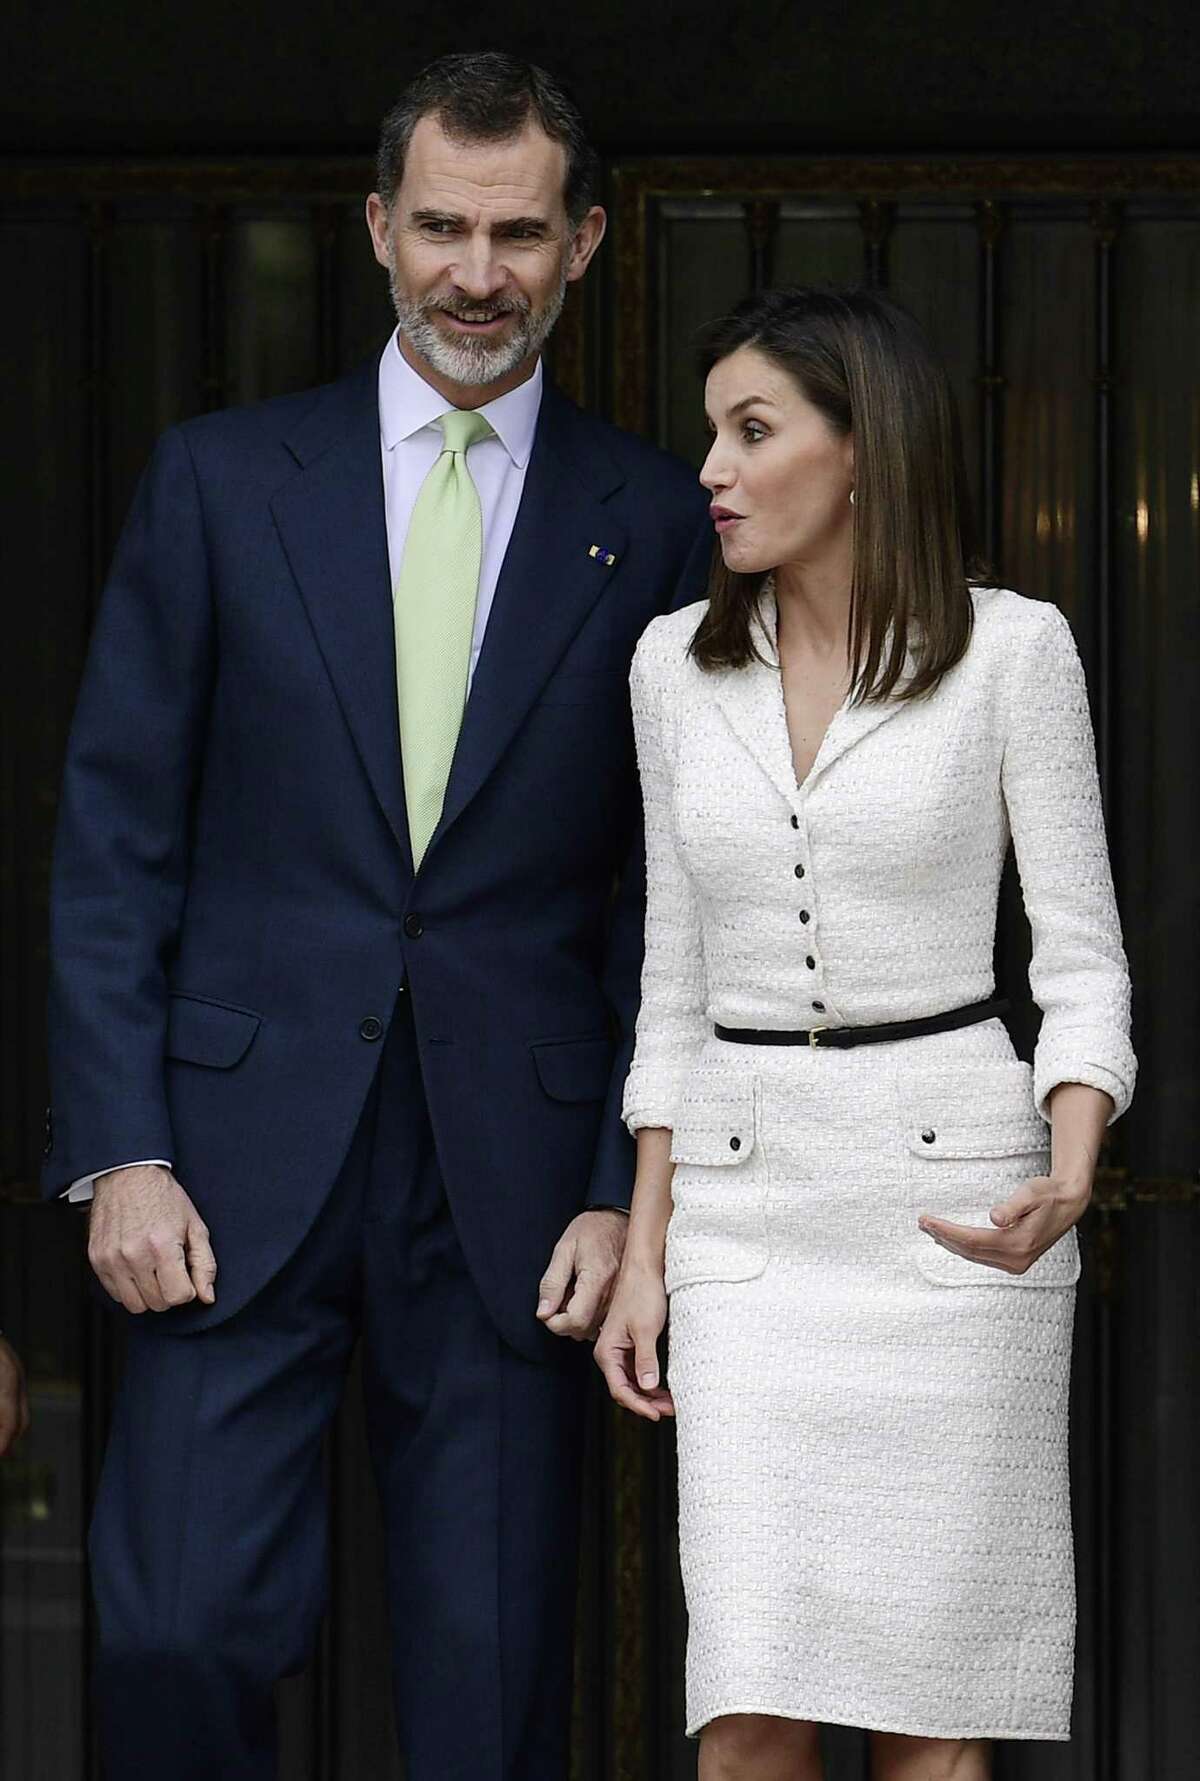 King and Queen of Spain to visit San Antonio